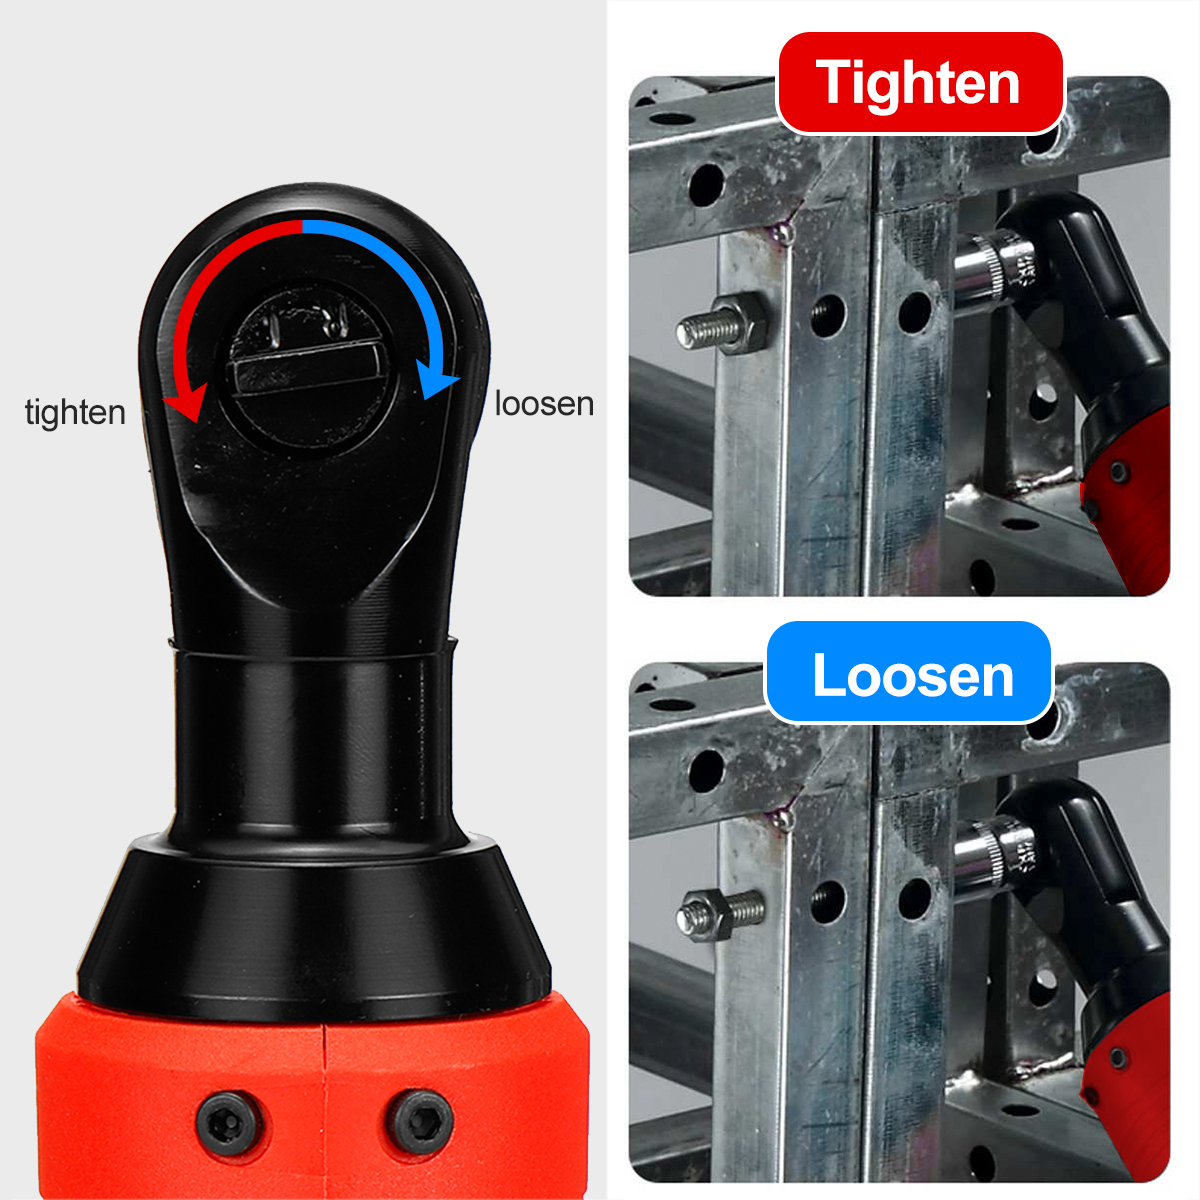 38Inch-Cordless-Ratchet-Wrench-18V-100NM-Electric-Ratchet-Wrench-Kit-w-12pcs-Battery-1845669-8